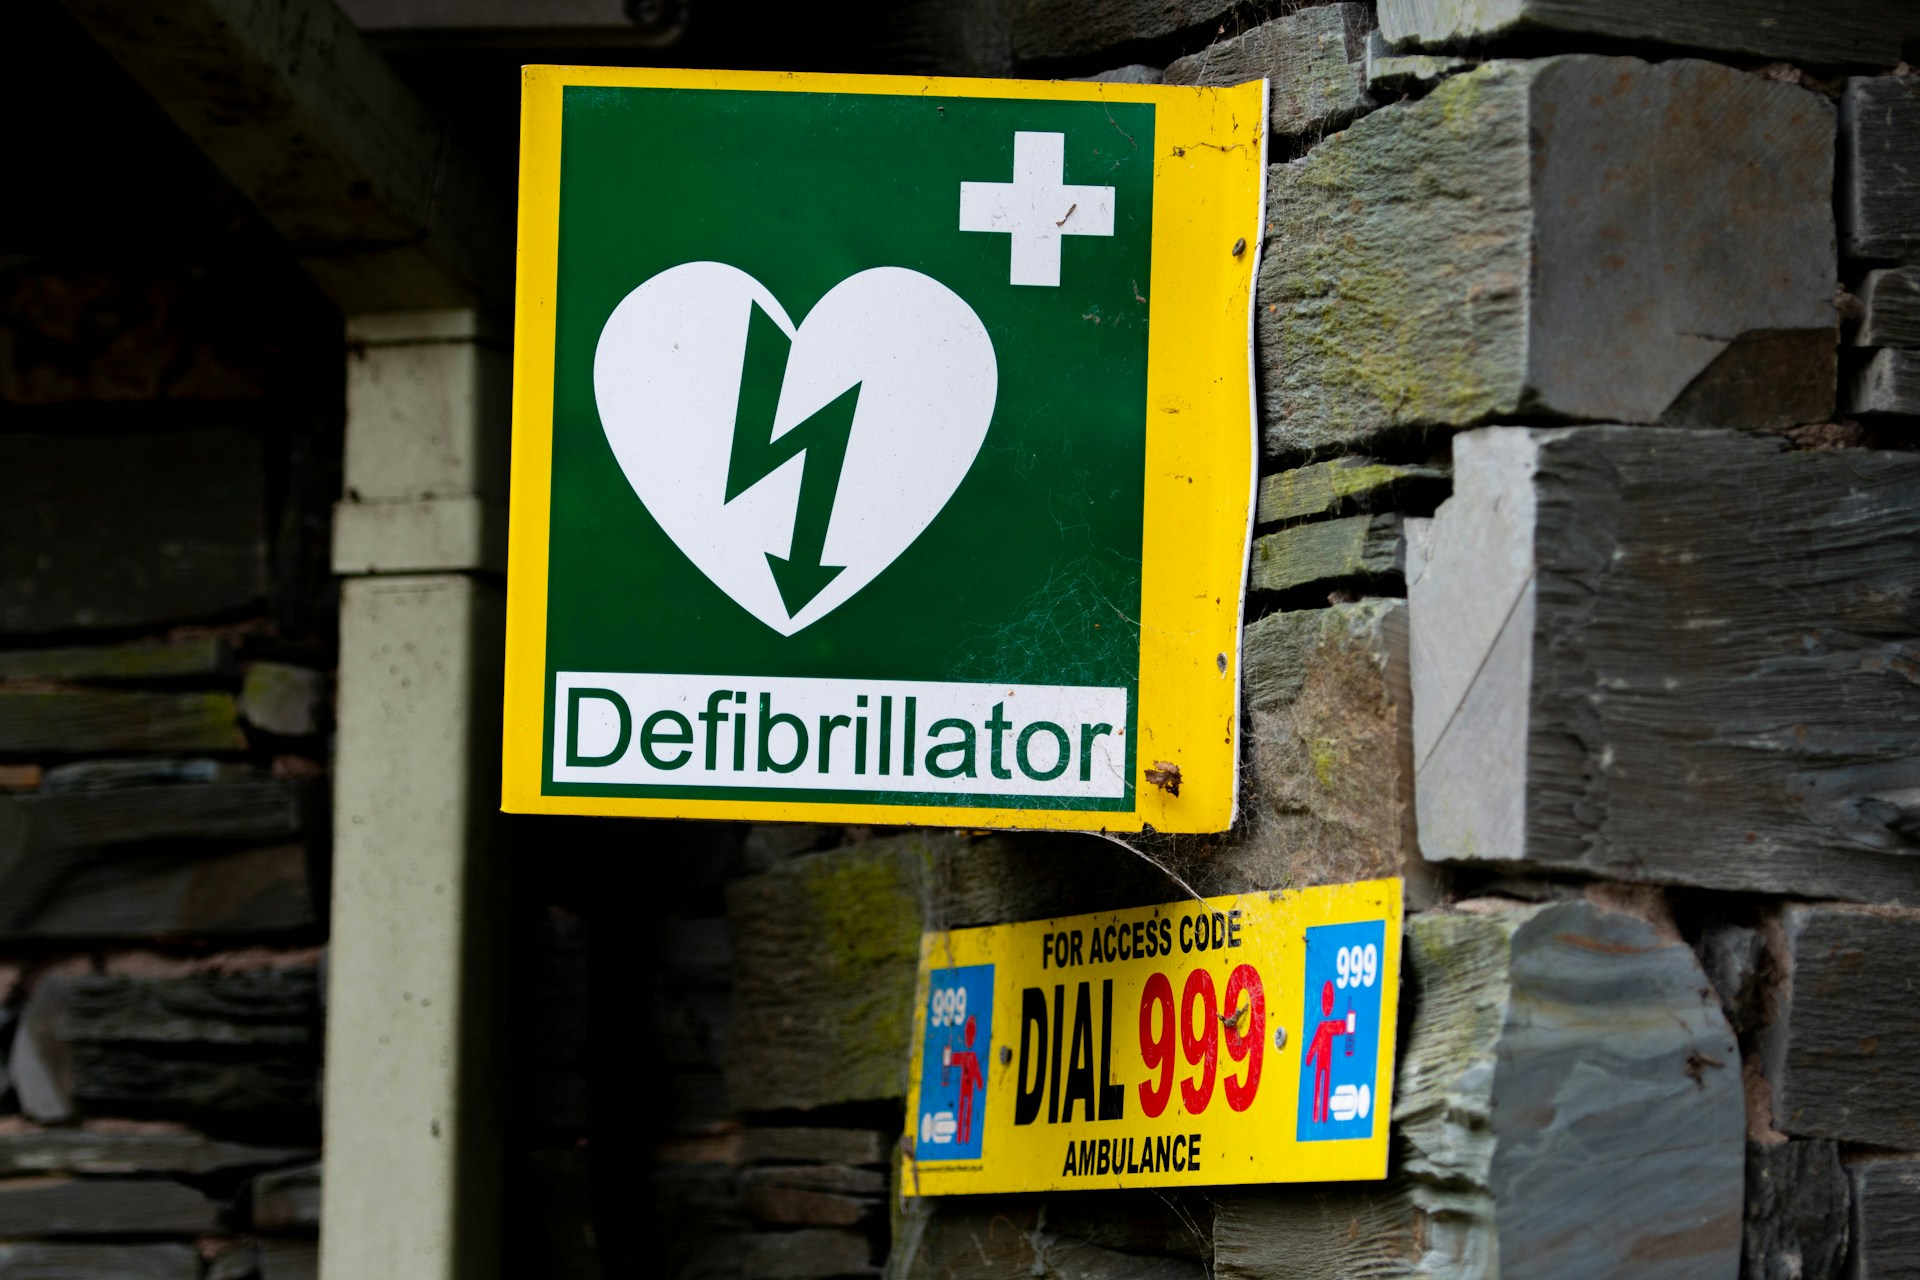 An image of a sign on a wall indicating that there is a defibrillator available for use